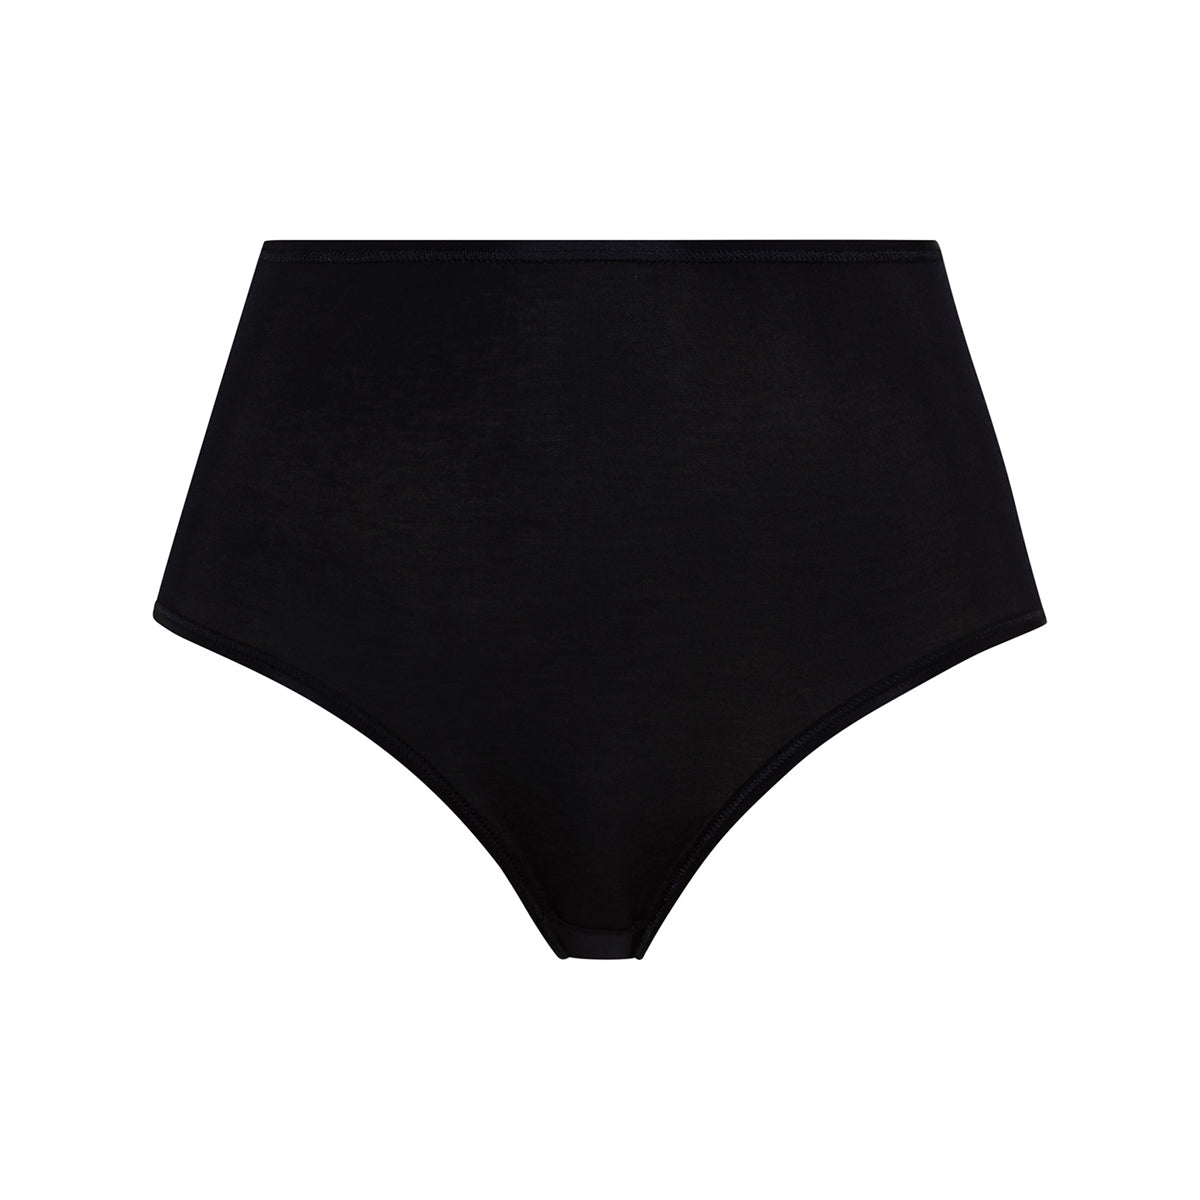 Hanro L125502 Womens Black Clia Low Rise Thong Size M for sale online